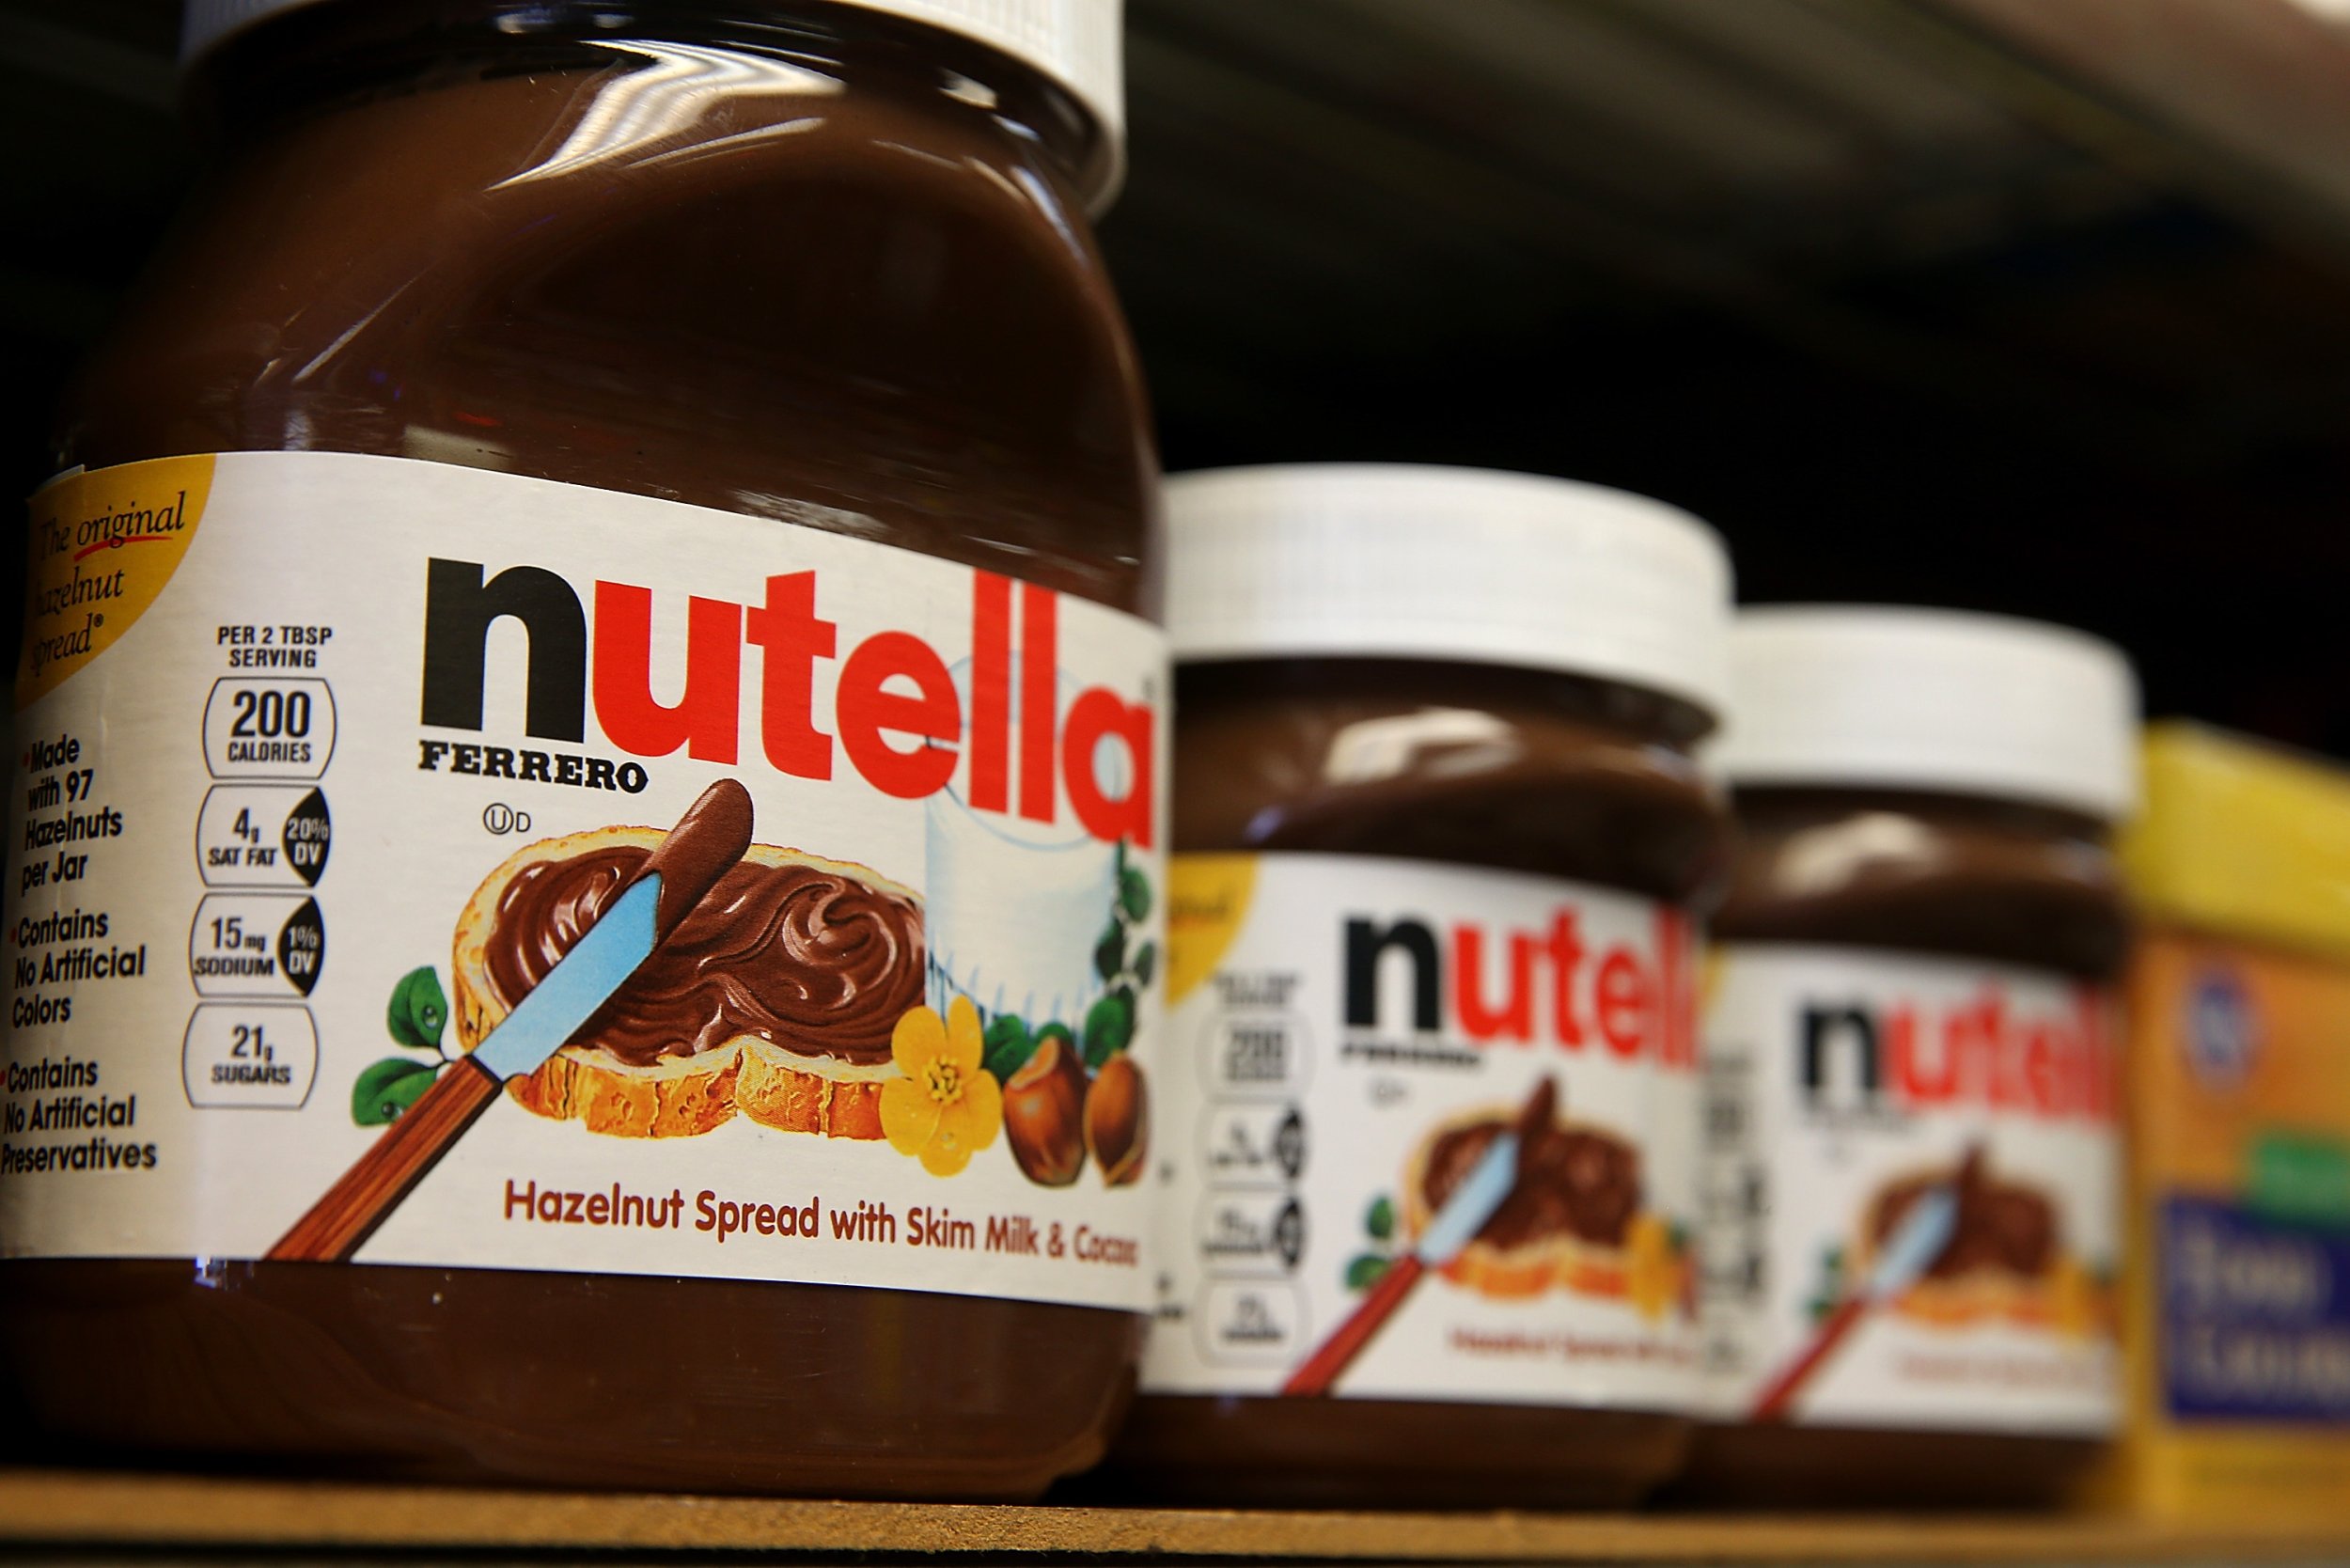 World Nutella Day 2021 12 Crazy Facts You May Not Know About The